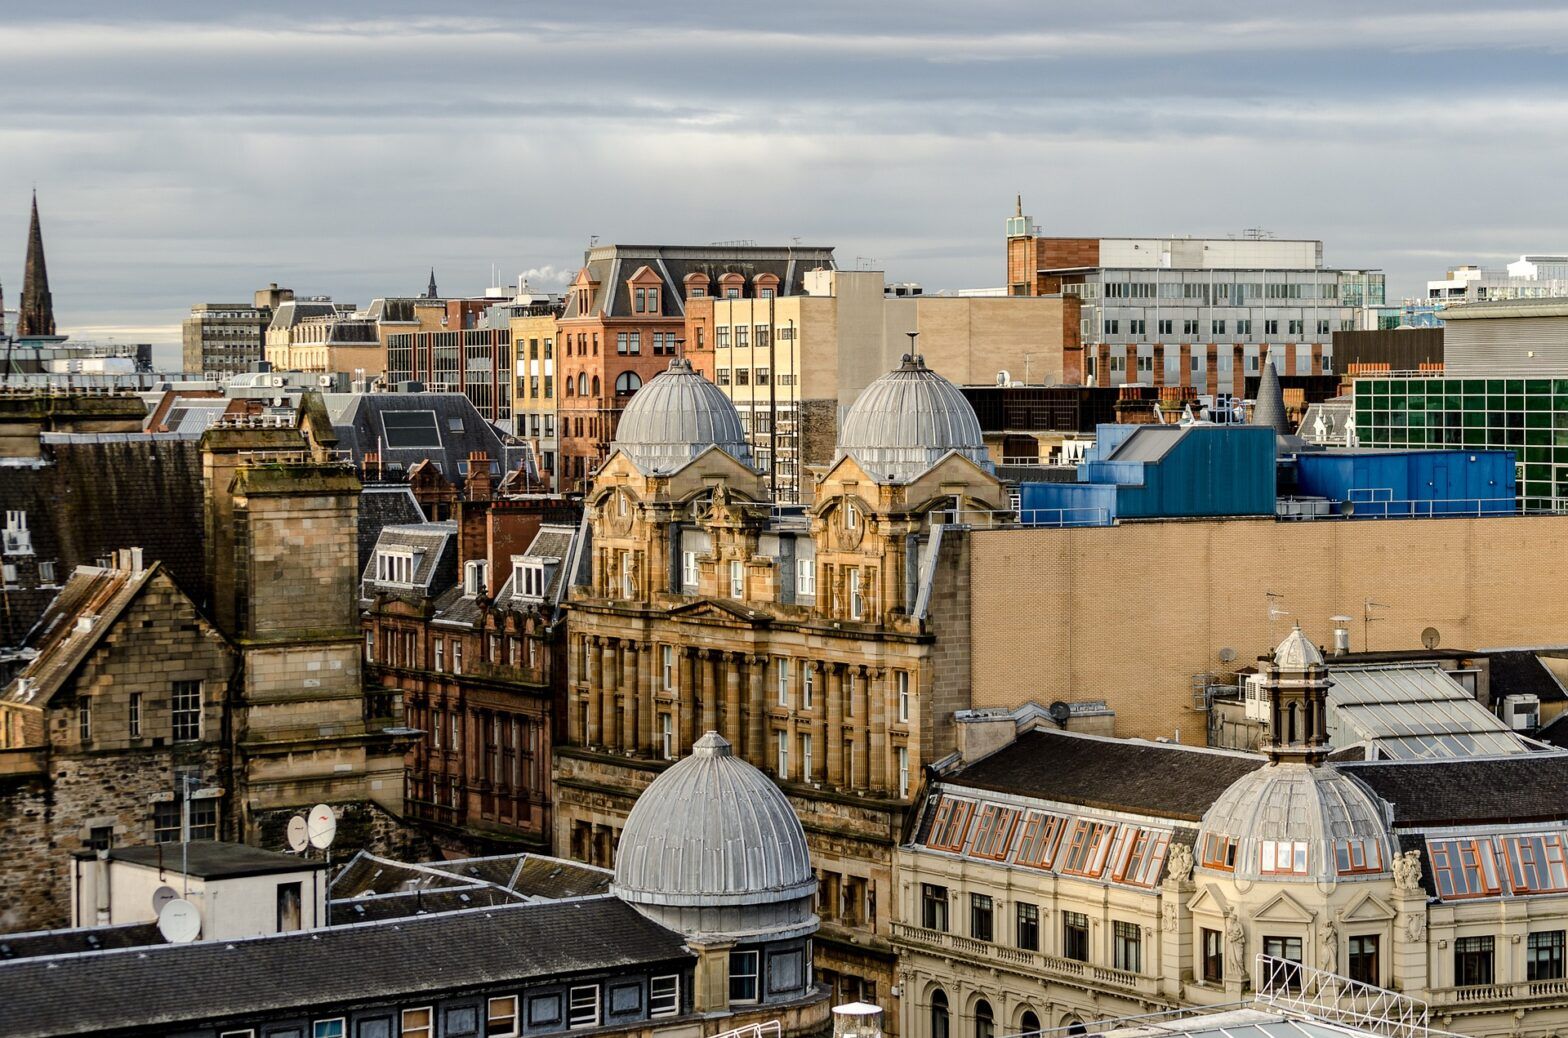 Glasgow announces £30bn of investable green projects